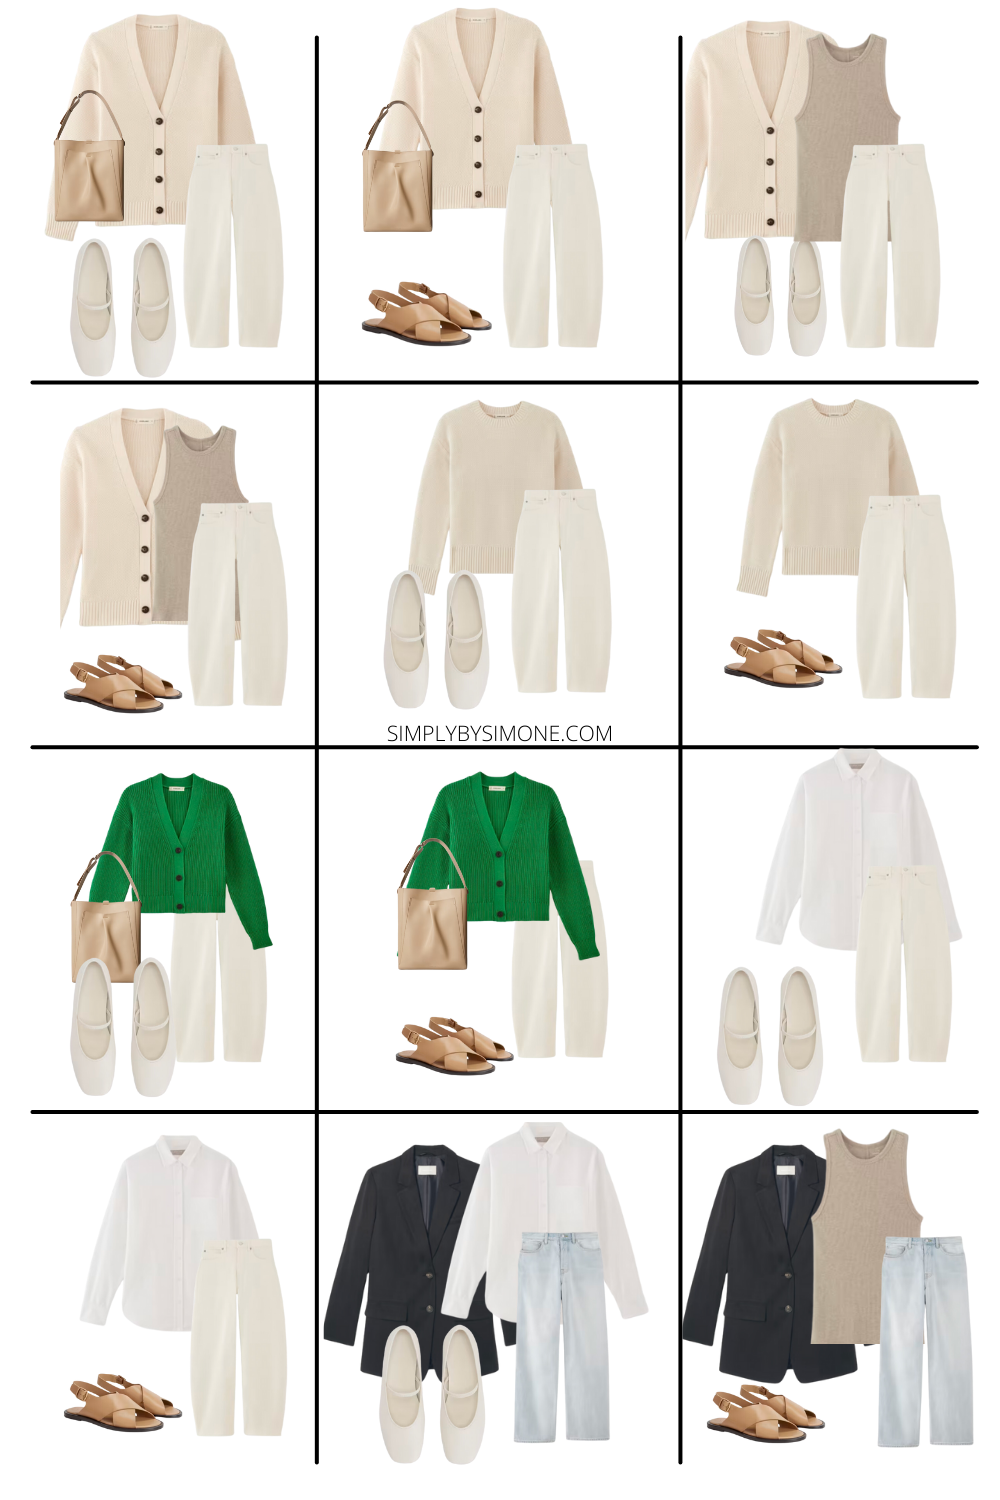 Everlane-Spring-Capsule-Wardrobe-What-to-wear-this-Spring-Looks-25-36